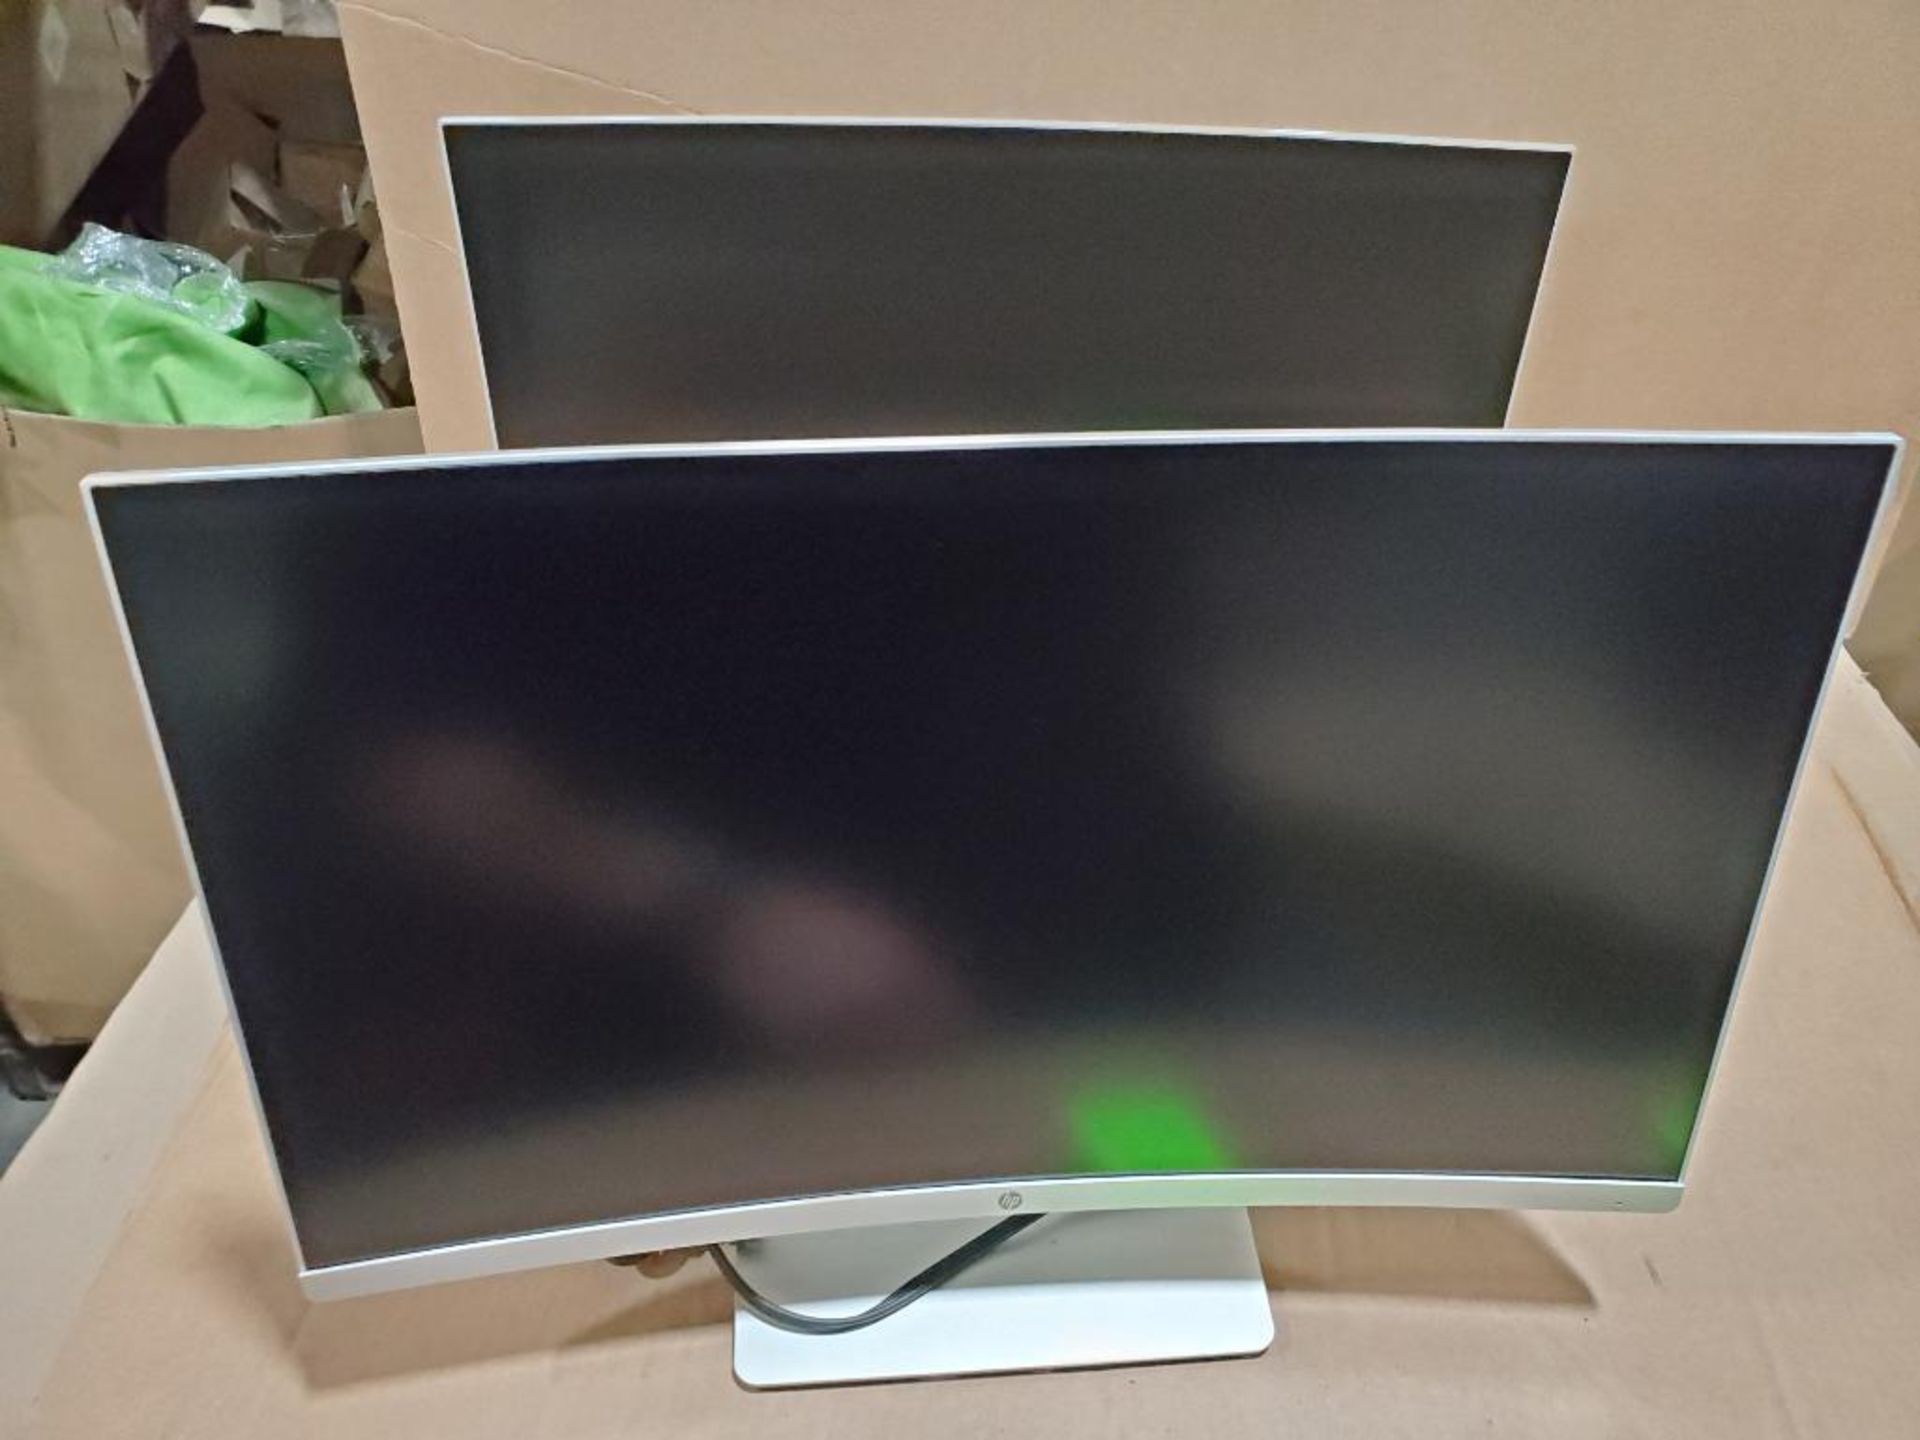 Qty 2 - HP curved monitors. 27in.